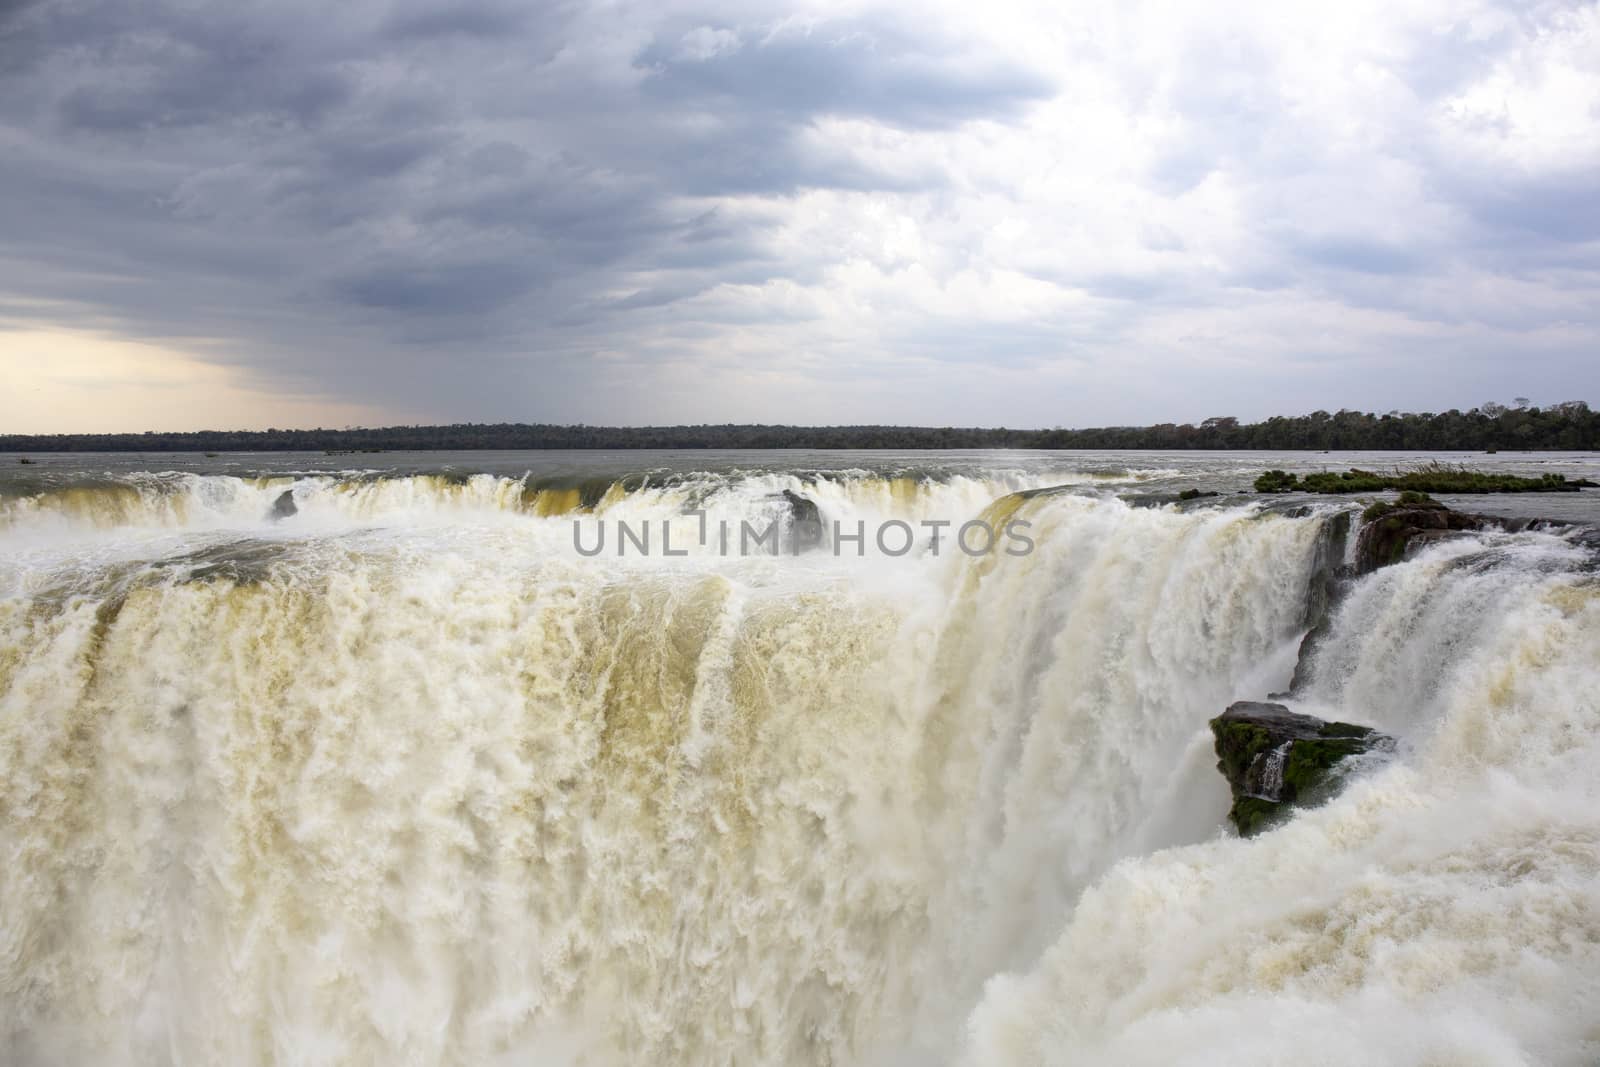 Devil's Throat at Iguazu Falls, one of the world's great natural by Tjeerdkruse